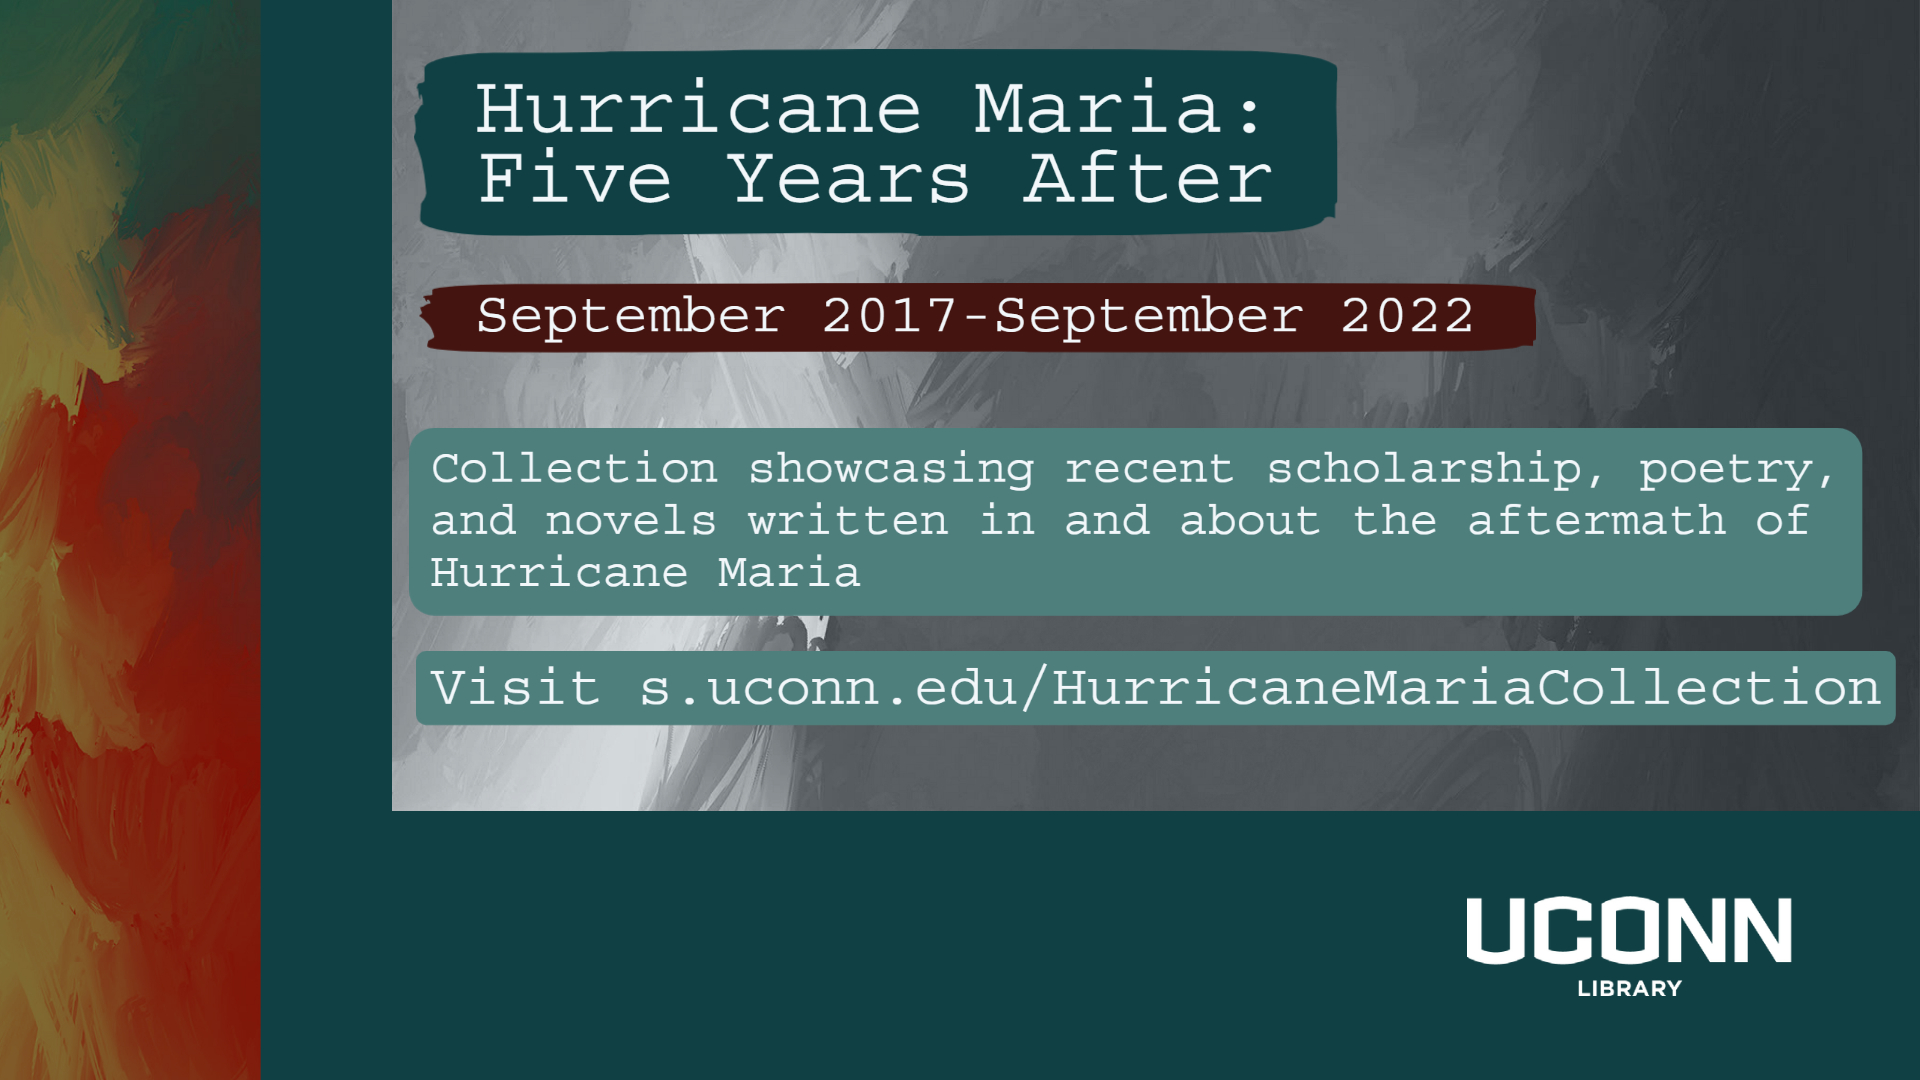 Hurricane Maria: Five Years after. September 2017-September 2022. Collection showcasing recent scholarship, poetry, and novels written in and about the aftermath of Hurricane Maria. Visit s.uconn.edu/HurricaneMariaCollection